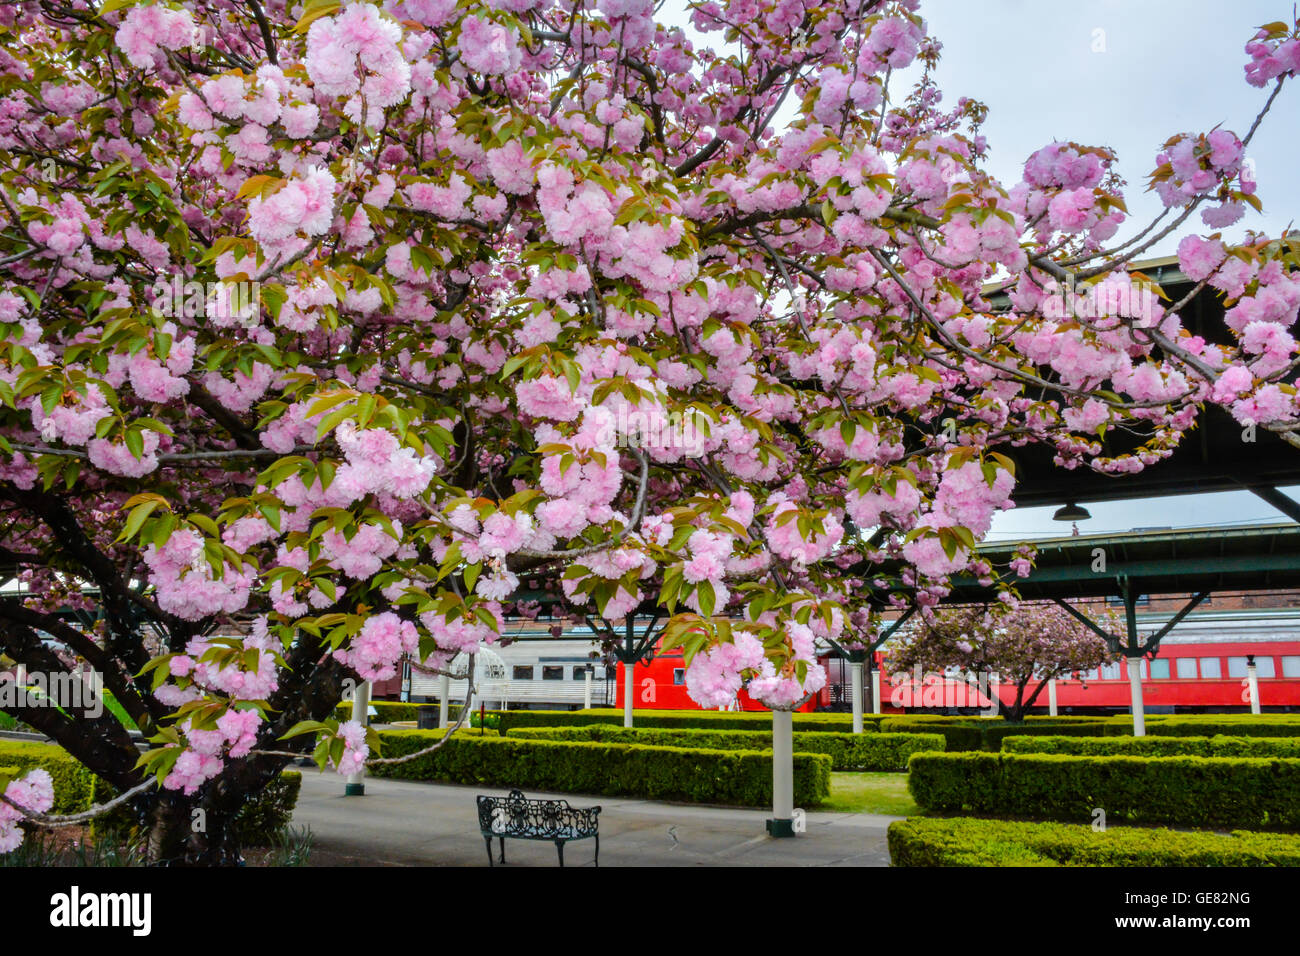 Pink Cherry Blossom Trees Blooming In Spring In Formal Garden Of